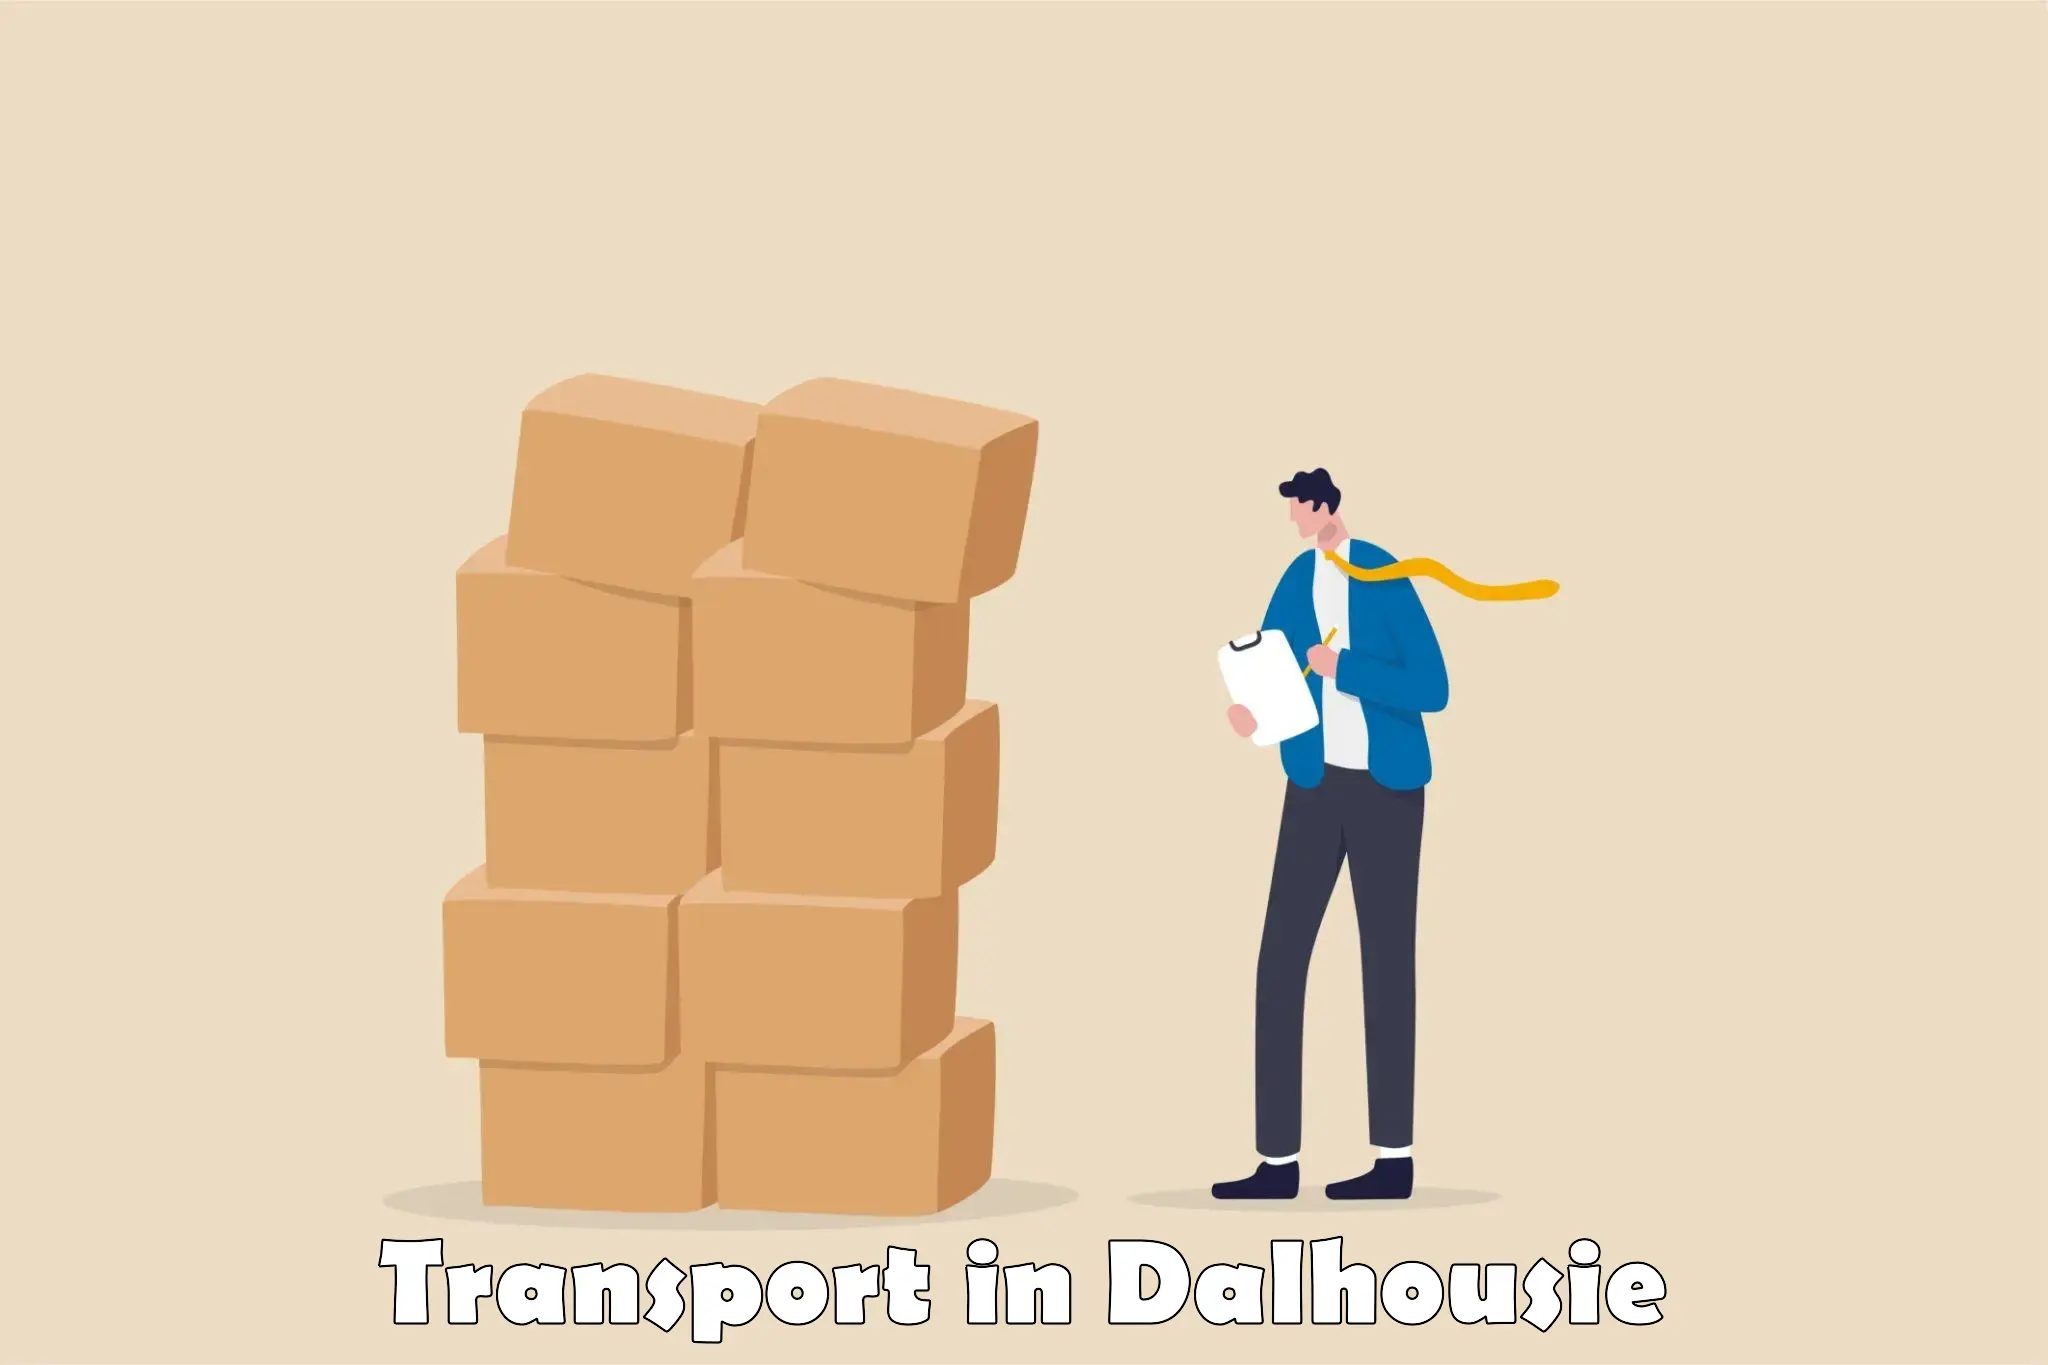 Daily transport service in Dalhousie